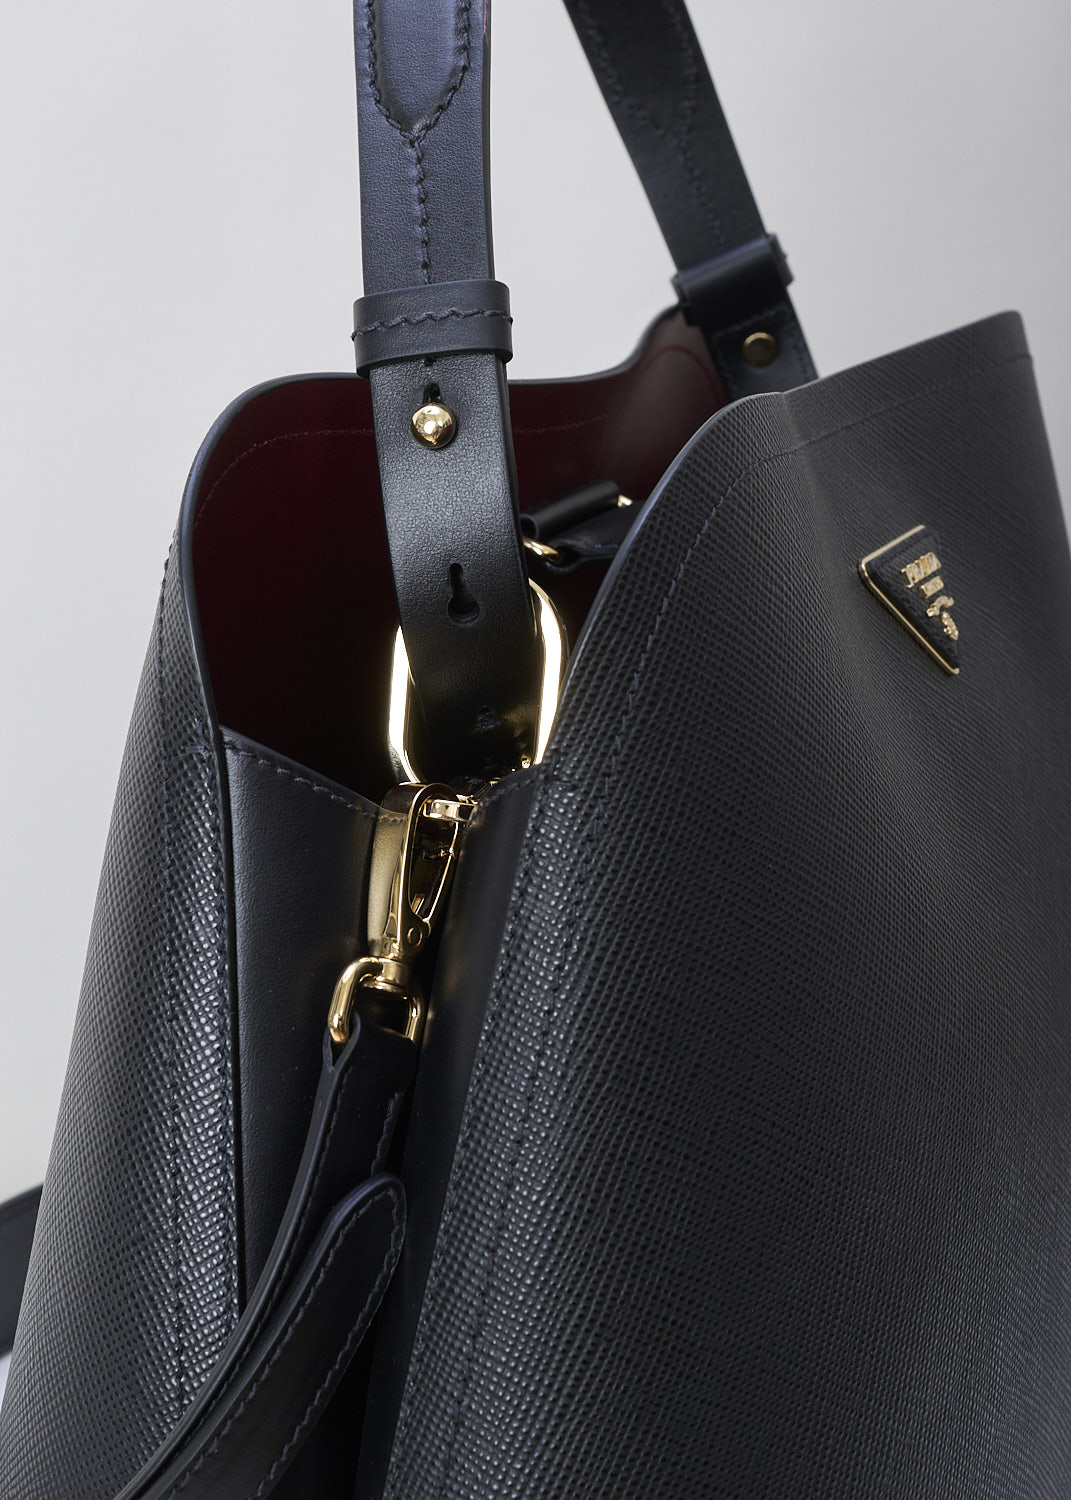 PRADA, MEDIUM MATINÃ‰E SHOULDER BAG IN BLACK, SAFFIANO_CUIR_C_1BA249_NERO_CERISE, Black, Detail, This black MatinÃ©e shoulder bag is made with Saffiano leather. Both the leather handle and shoulder strap are adjustable and detachable. The bag has gold-tone metal hardware with the brand's triangle logo plaque on the front. The open top has a magnetic snap closure in the middle. The cherry red interior has a centre zip pocket that divides the main compartment into two spacious sides. The bag has are movable leather keychain.  

